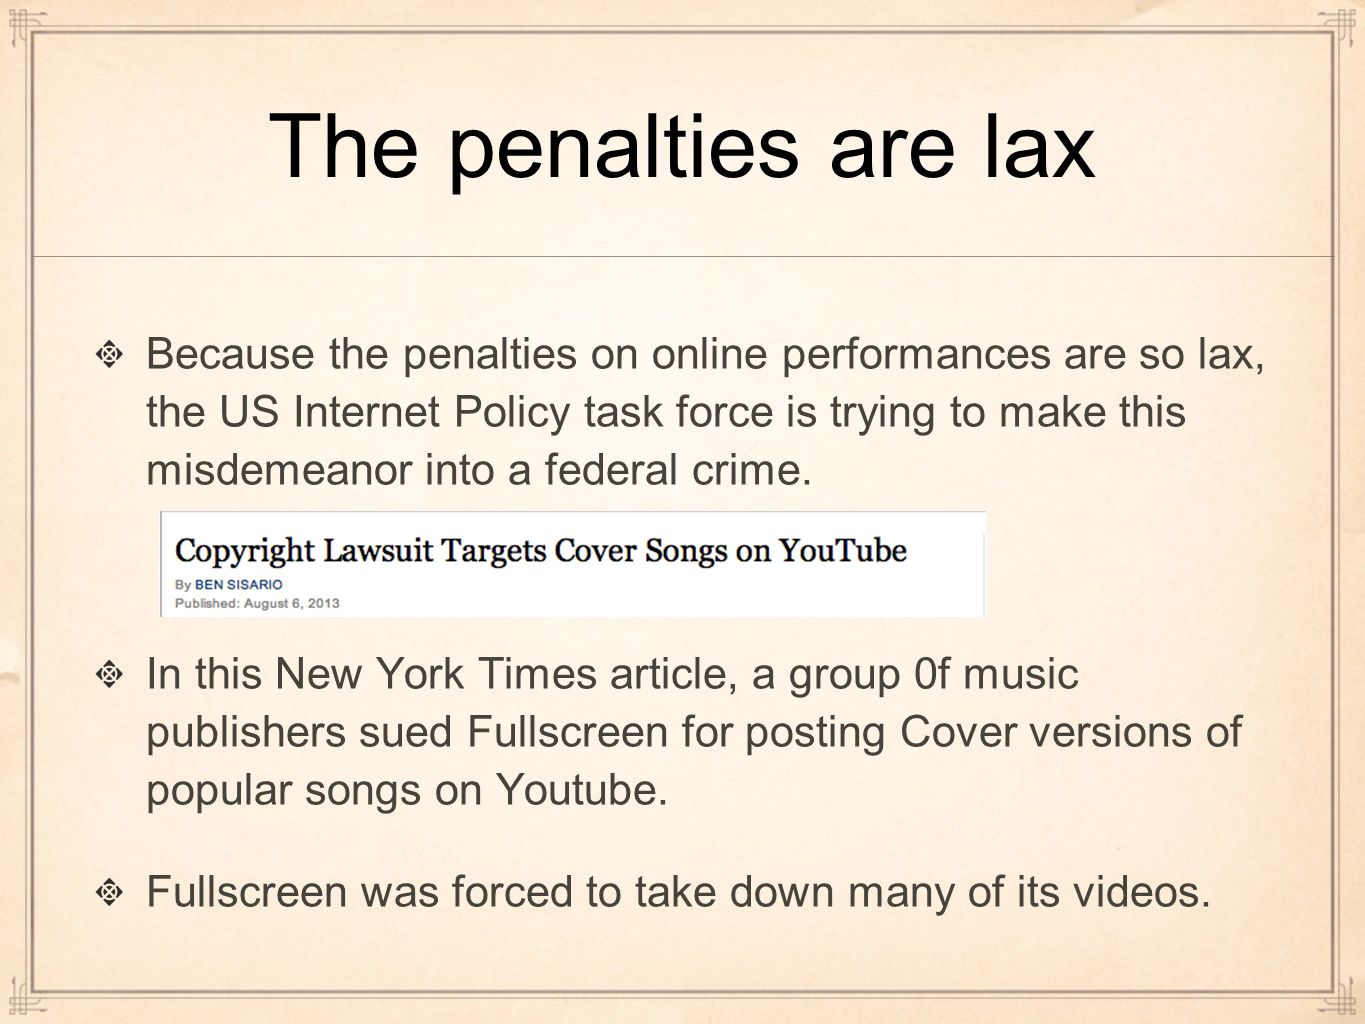 The penalties are lax Because the penalties on online performances are so lax, the US Internet Policy task force is trying to make this misdemeanor into a federal crime.